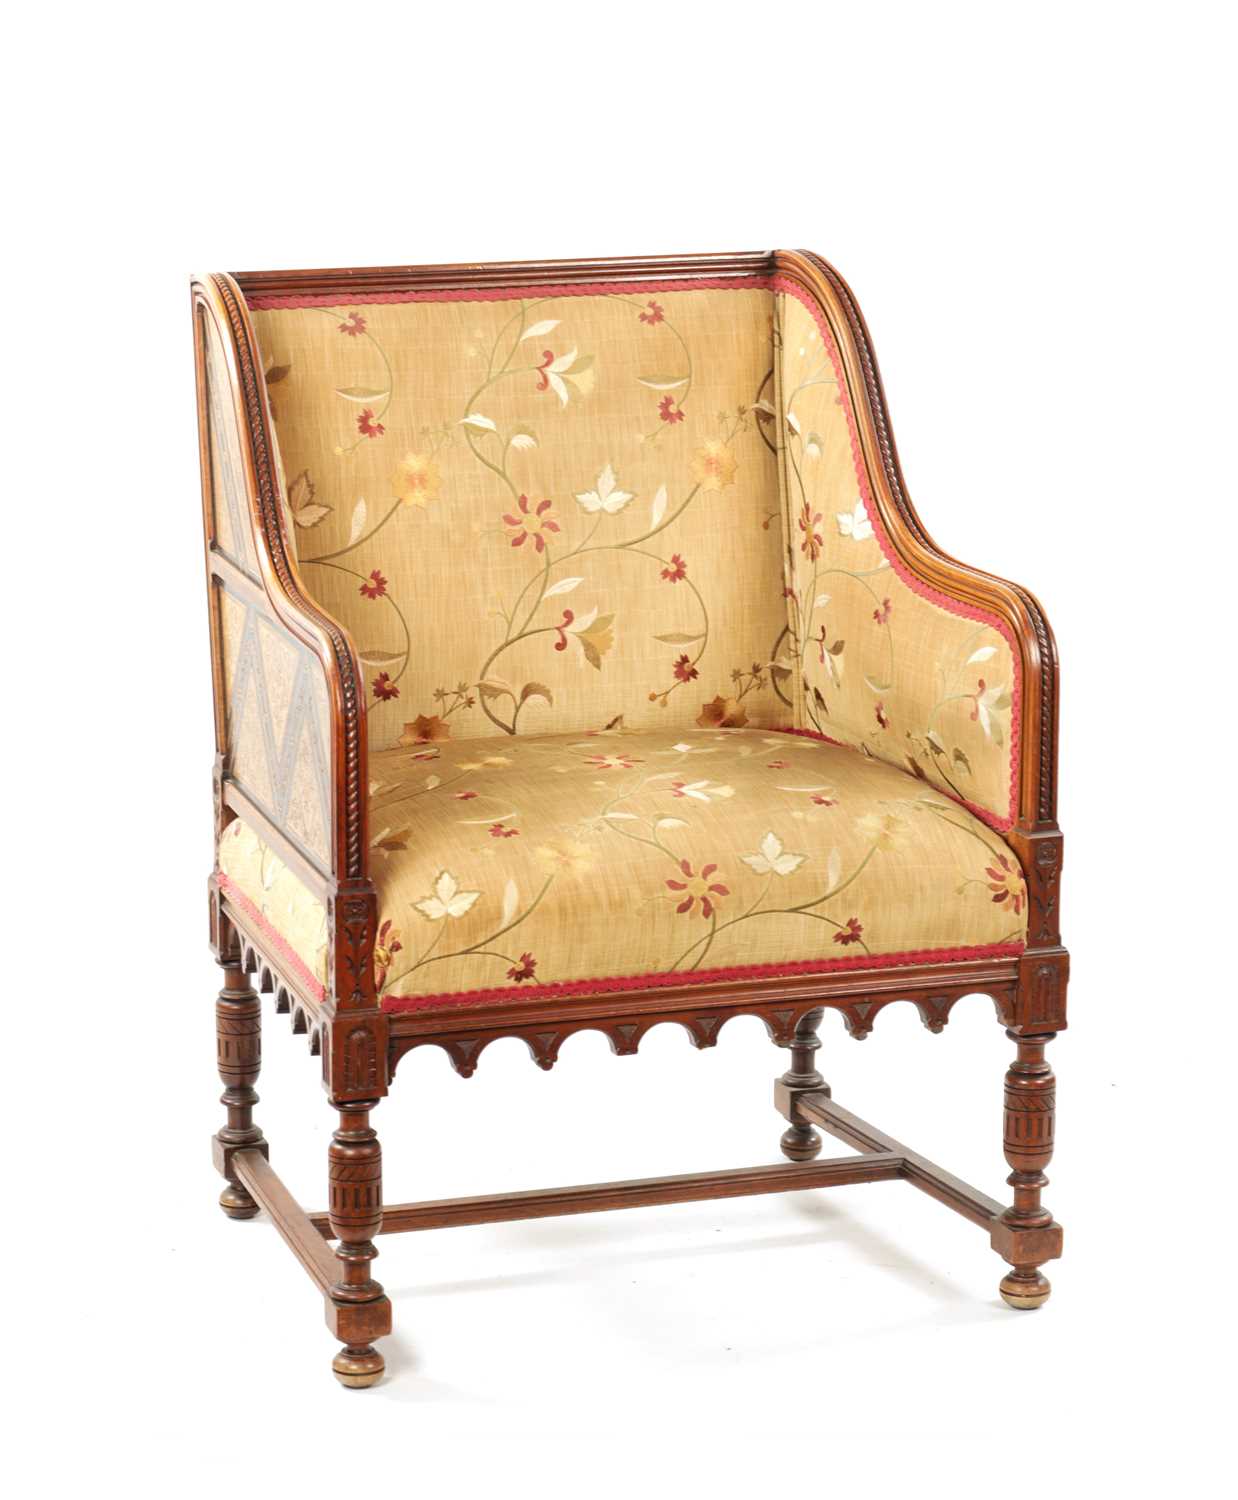 A FINE LATE 19TH CENTURY INLAID WALNUT AESTHETIC PERIOD CHAIR IN THE MANNER WILLIAM MORRIS